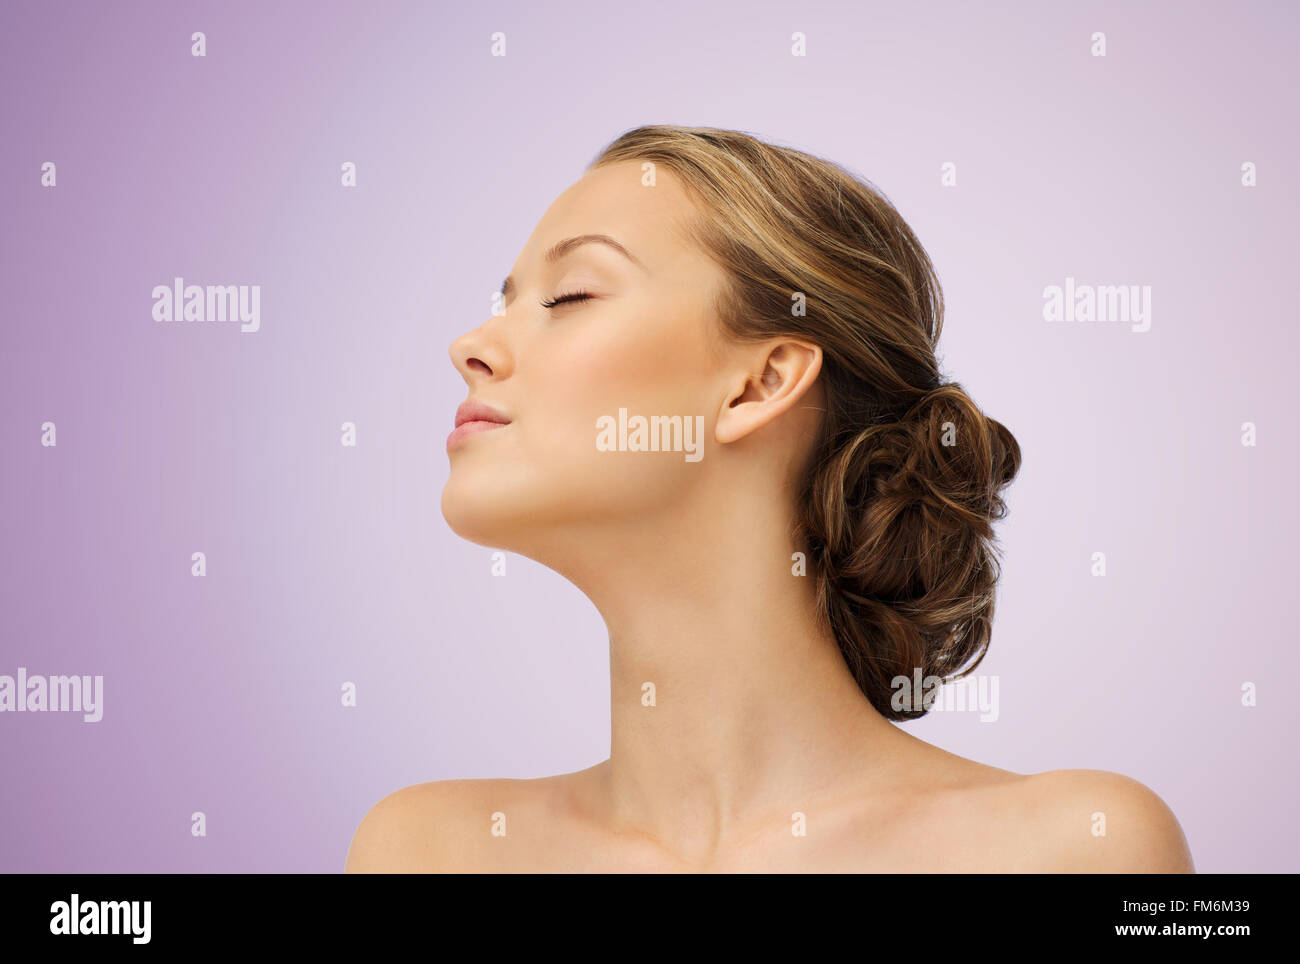 young woman face side view and shoulders Stock Photo